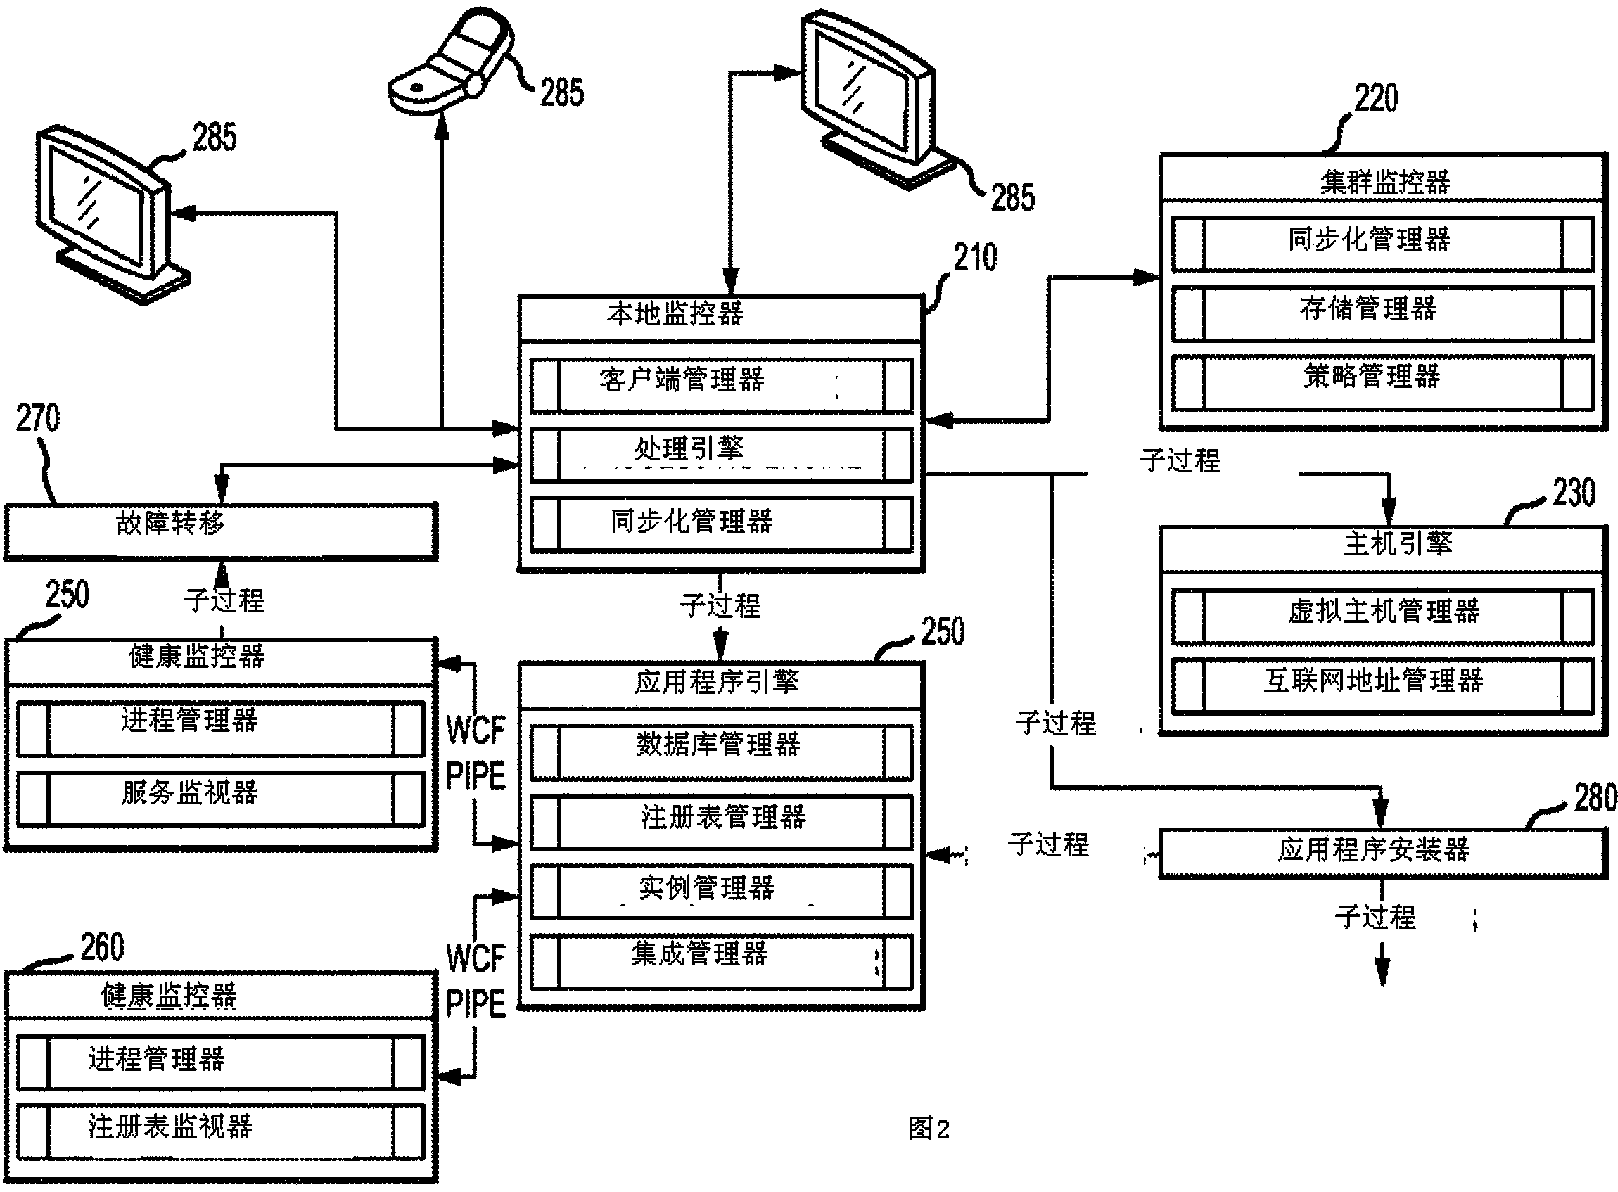 Systems and methods for server cluster application virtualization